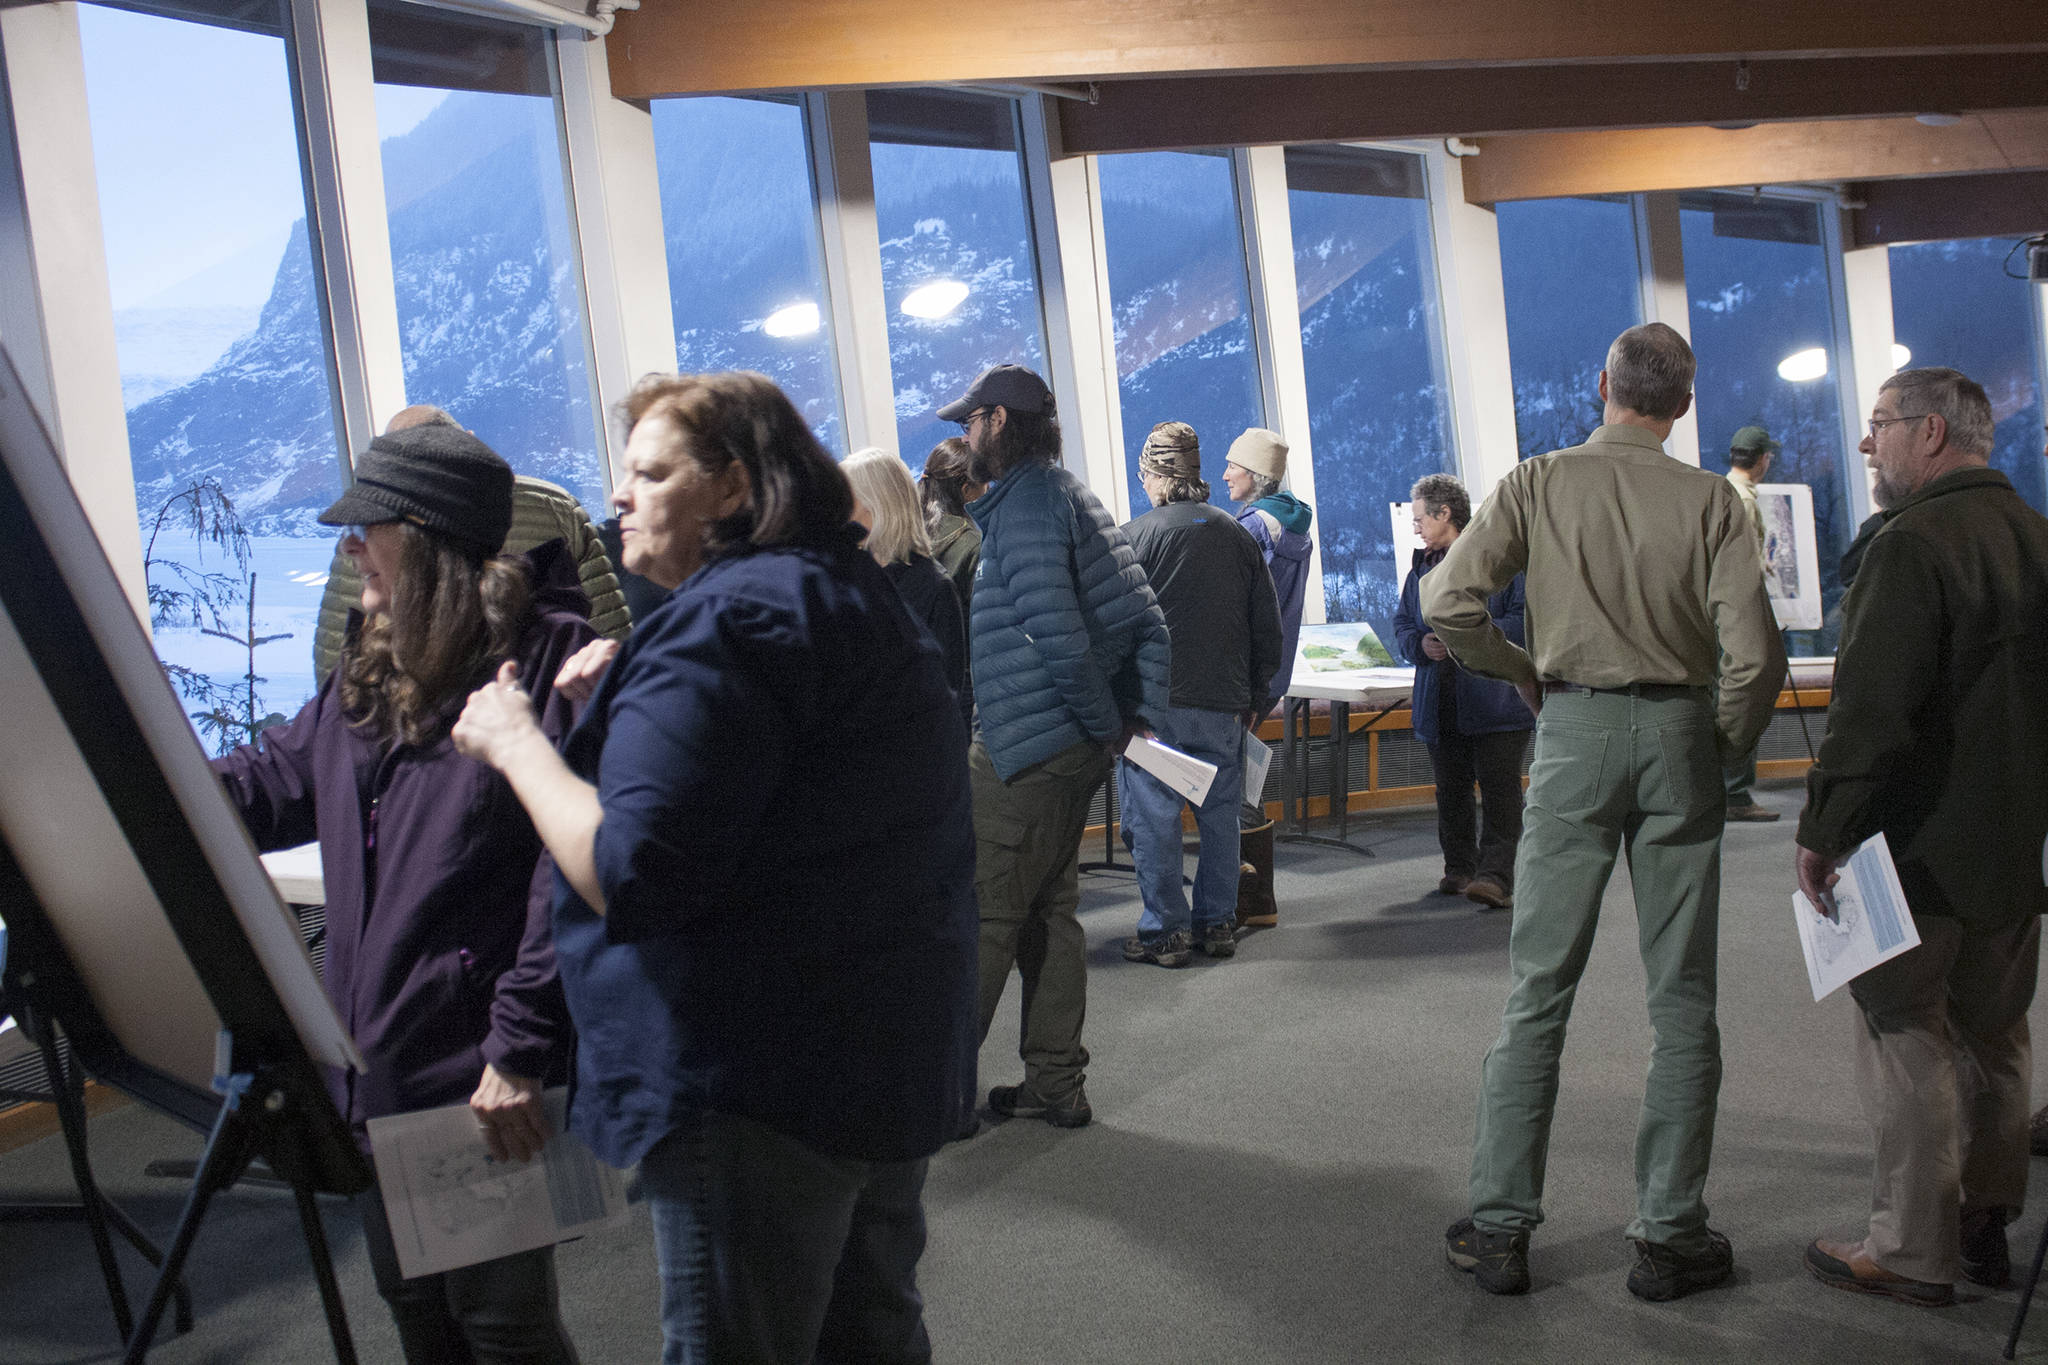 Despite howling winds and plenty of slush, dozens of people attended a scoping open house in February 2020 at the Mendenhall Glacier Visitor Center. (Ben Hohenstatt / Juneau Empire File)